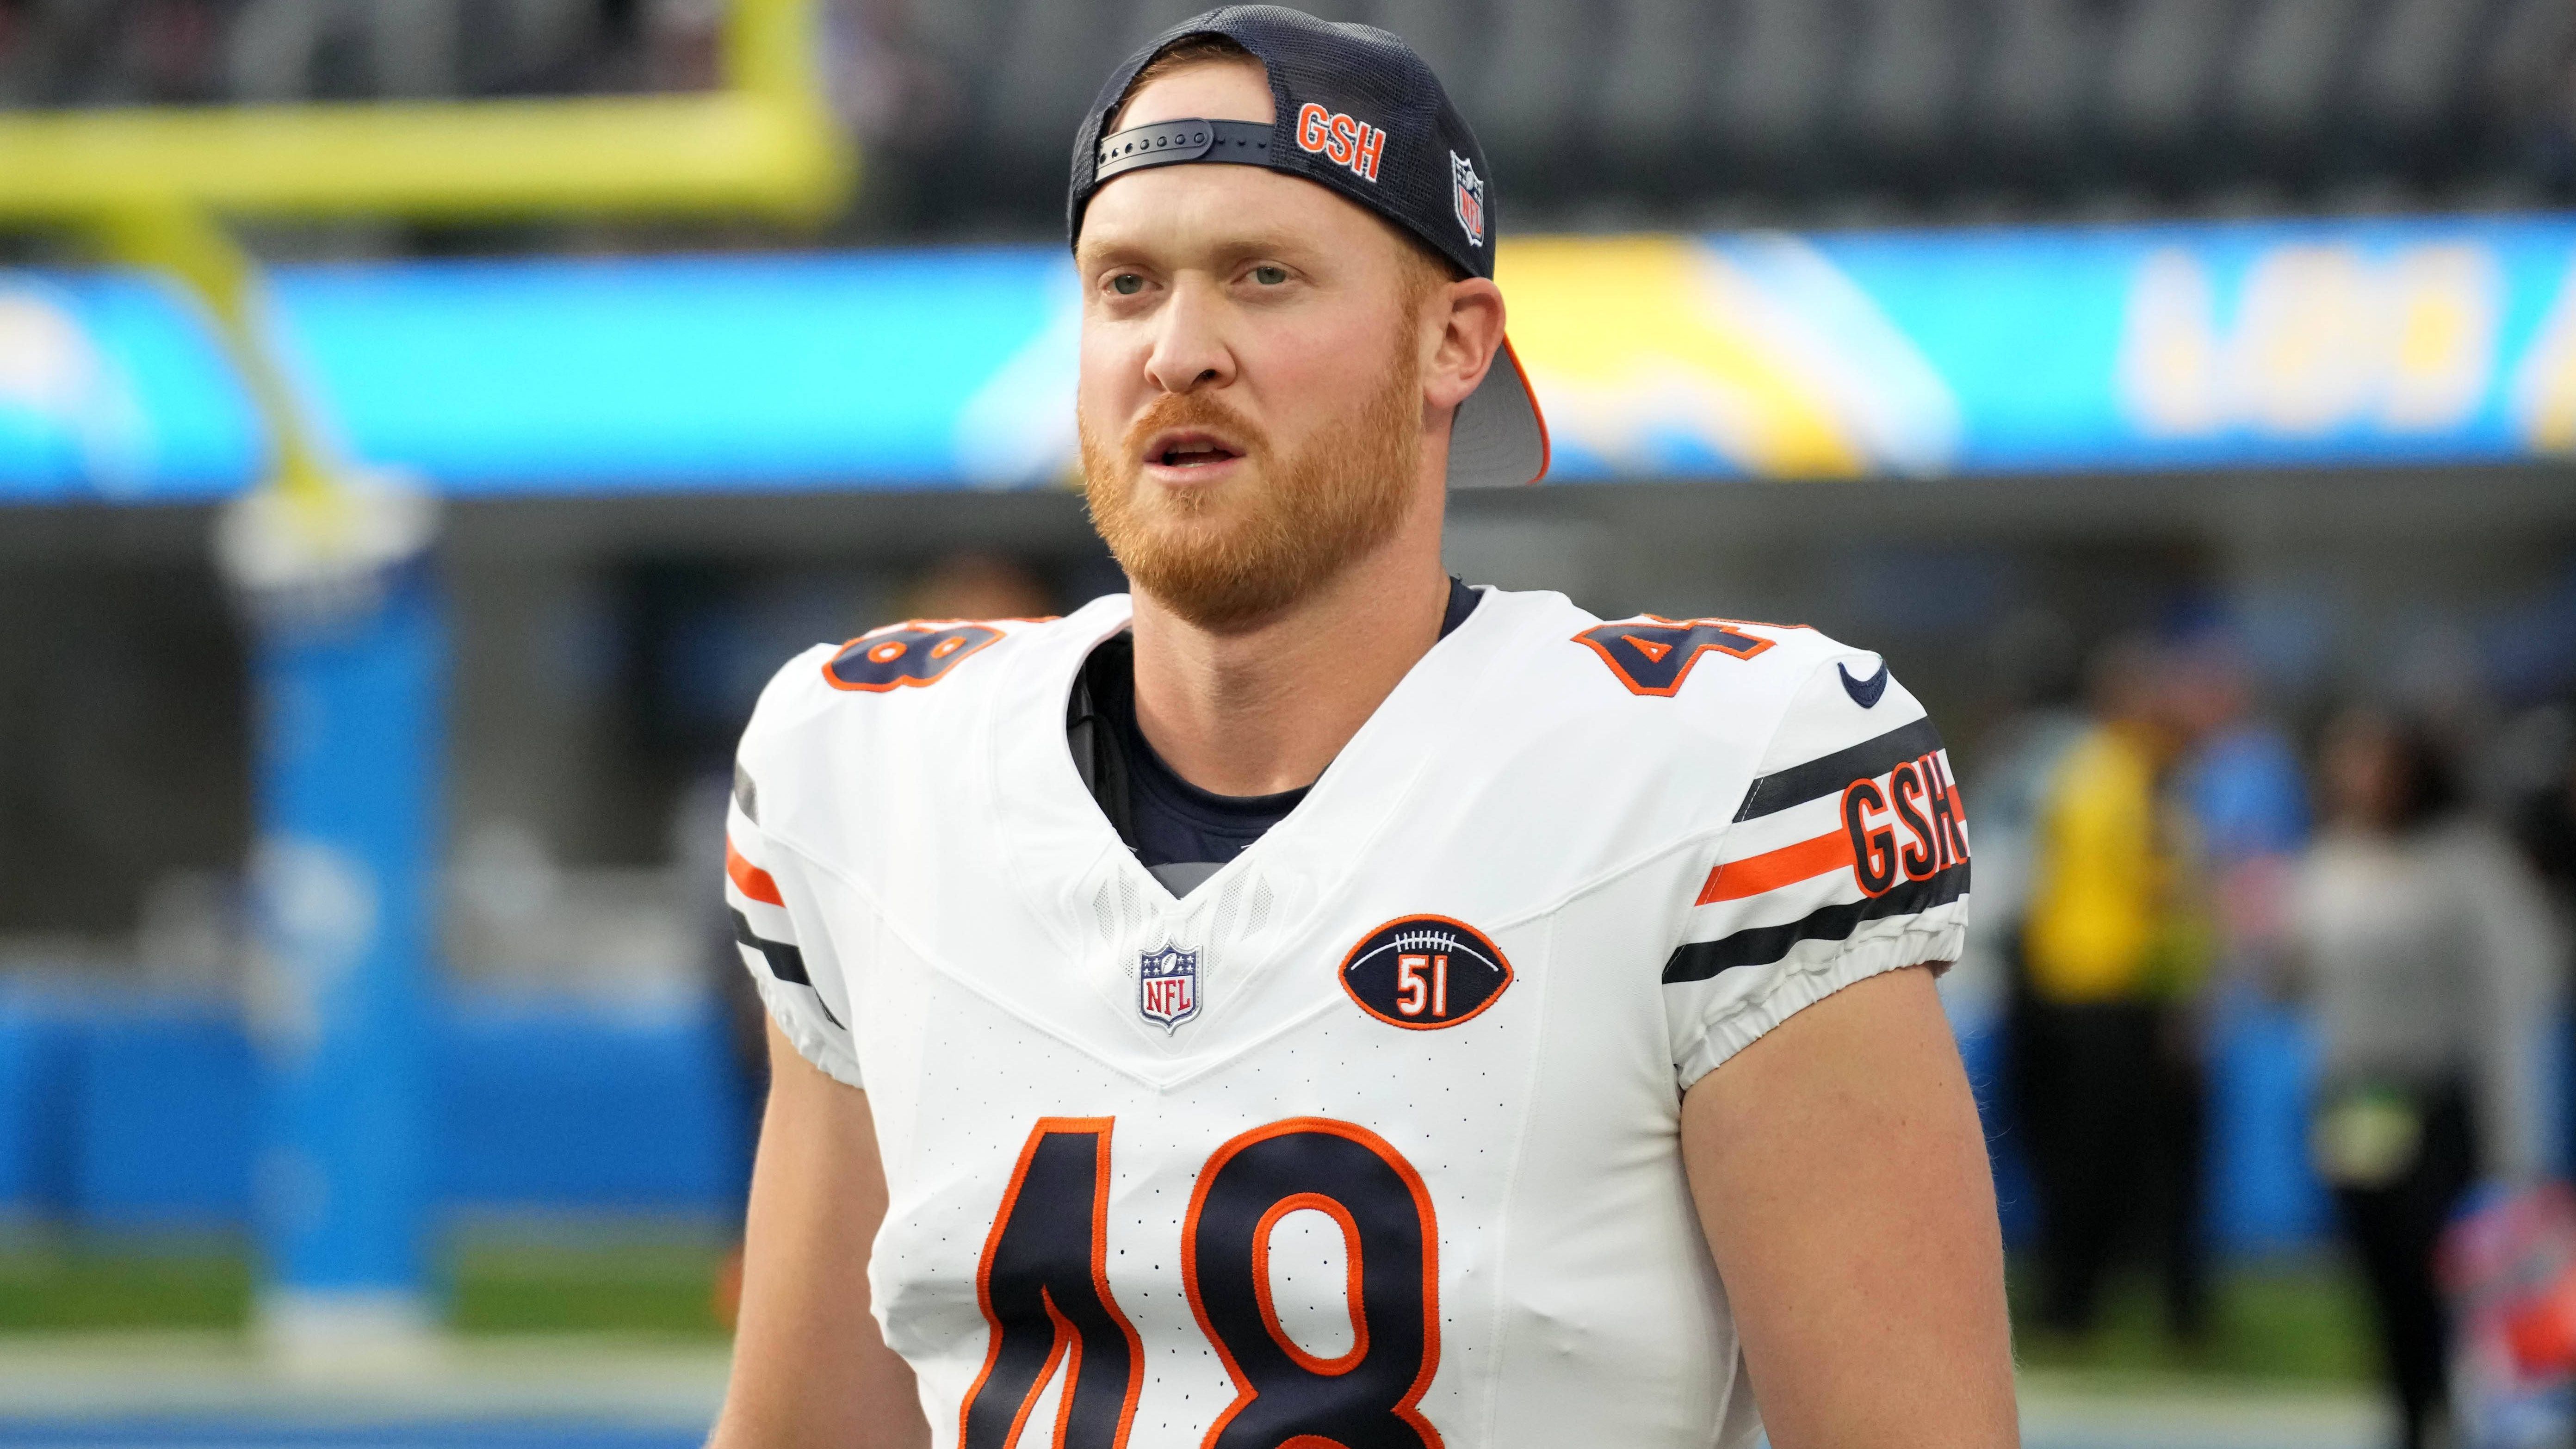 <strong>Chicago Bears: Patrick Scales<br></strong>Alter: 36 Jahre, 1 Monat und 30 Tage<br>Geburtsdatum: 11. Februar 1988<br>Position: Long Snapper